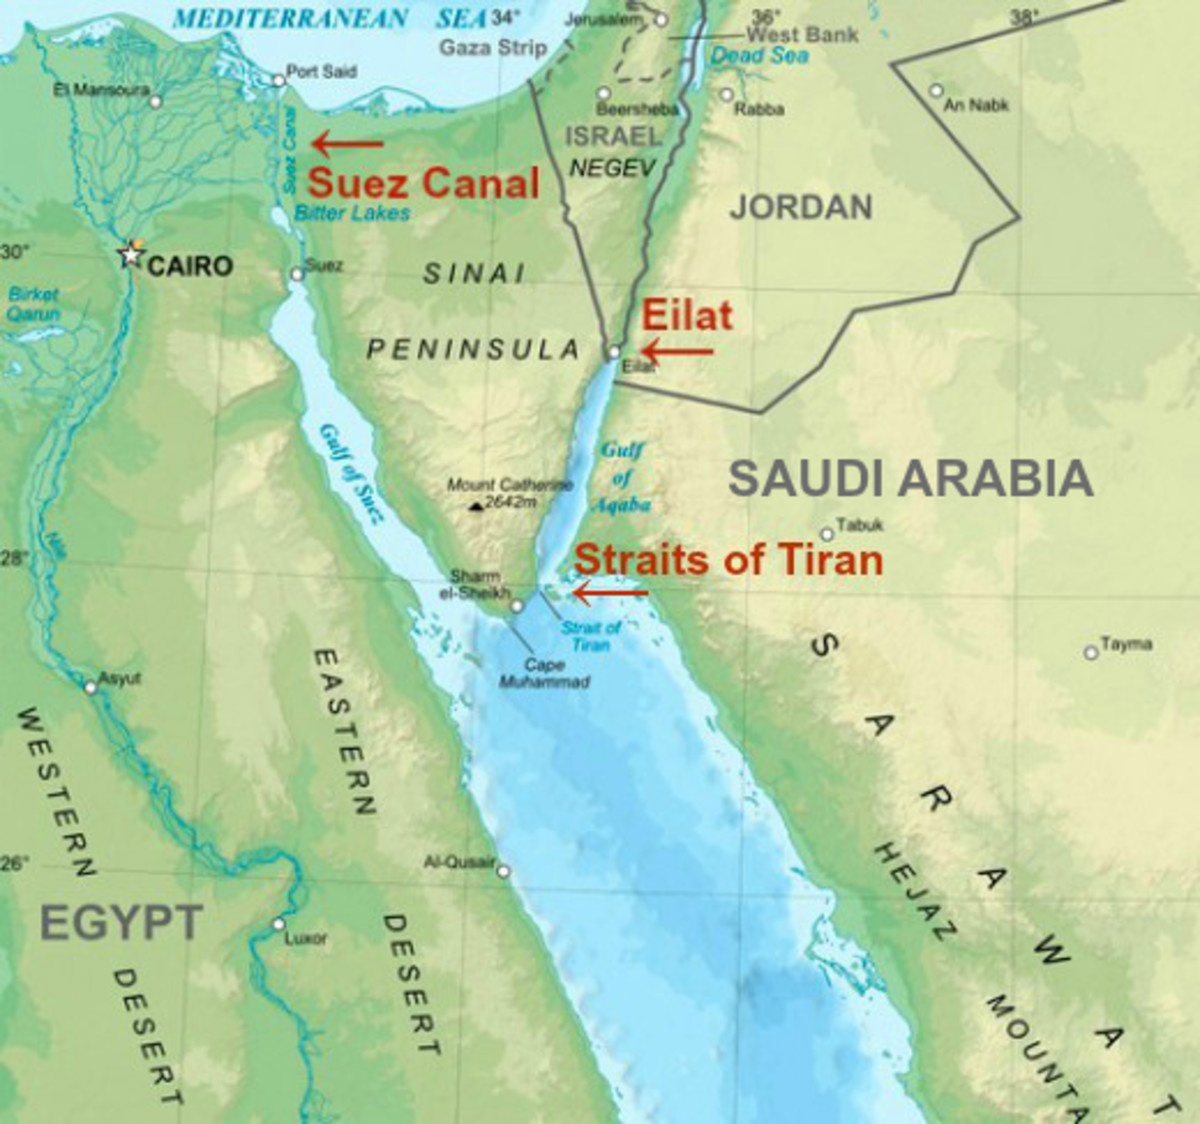 Map of the Suez Canal, the Rea Sea Port in Eilat, Israel, and the Straits of Tiran